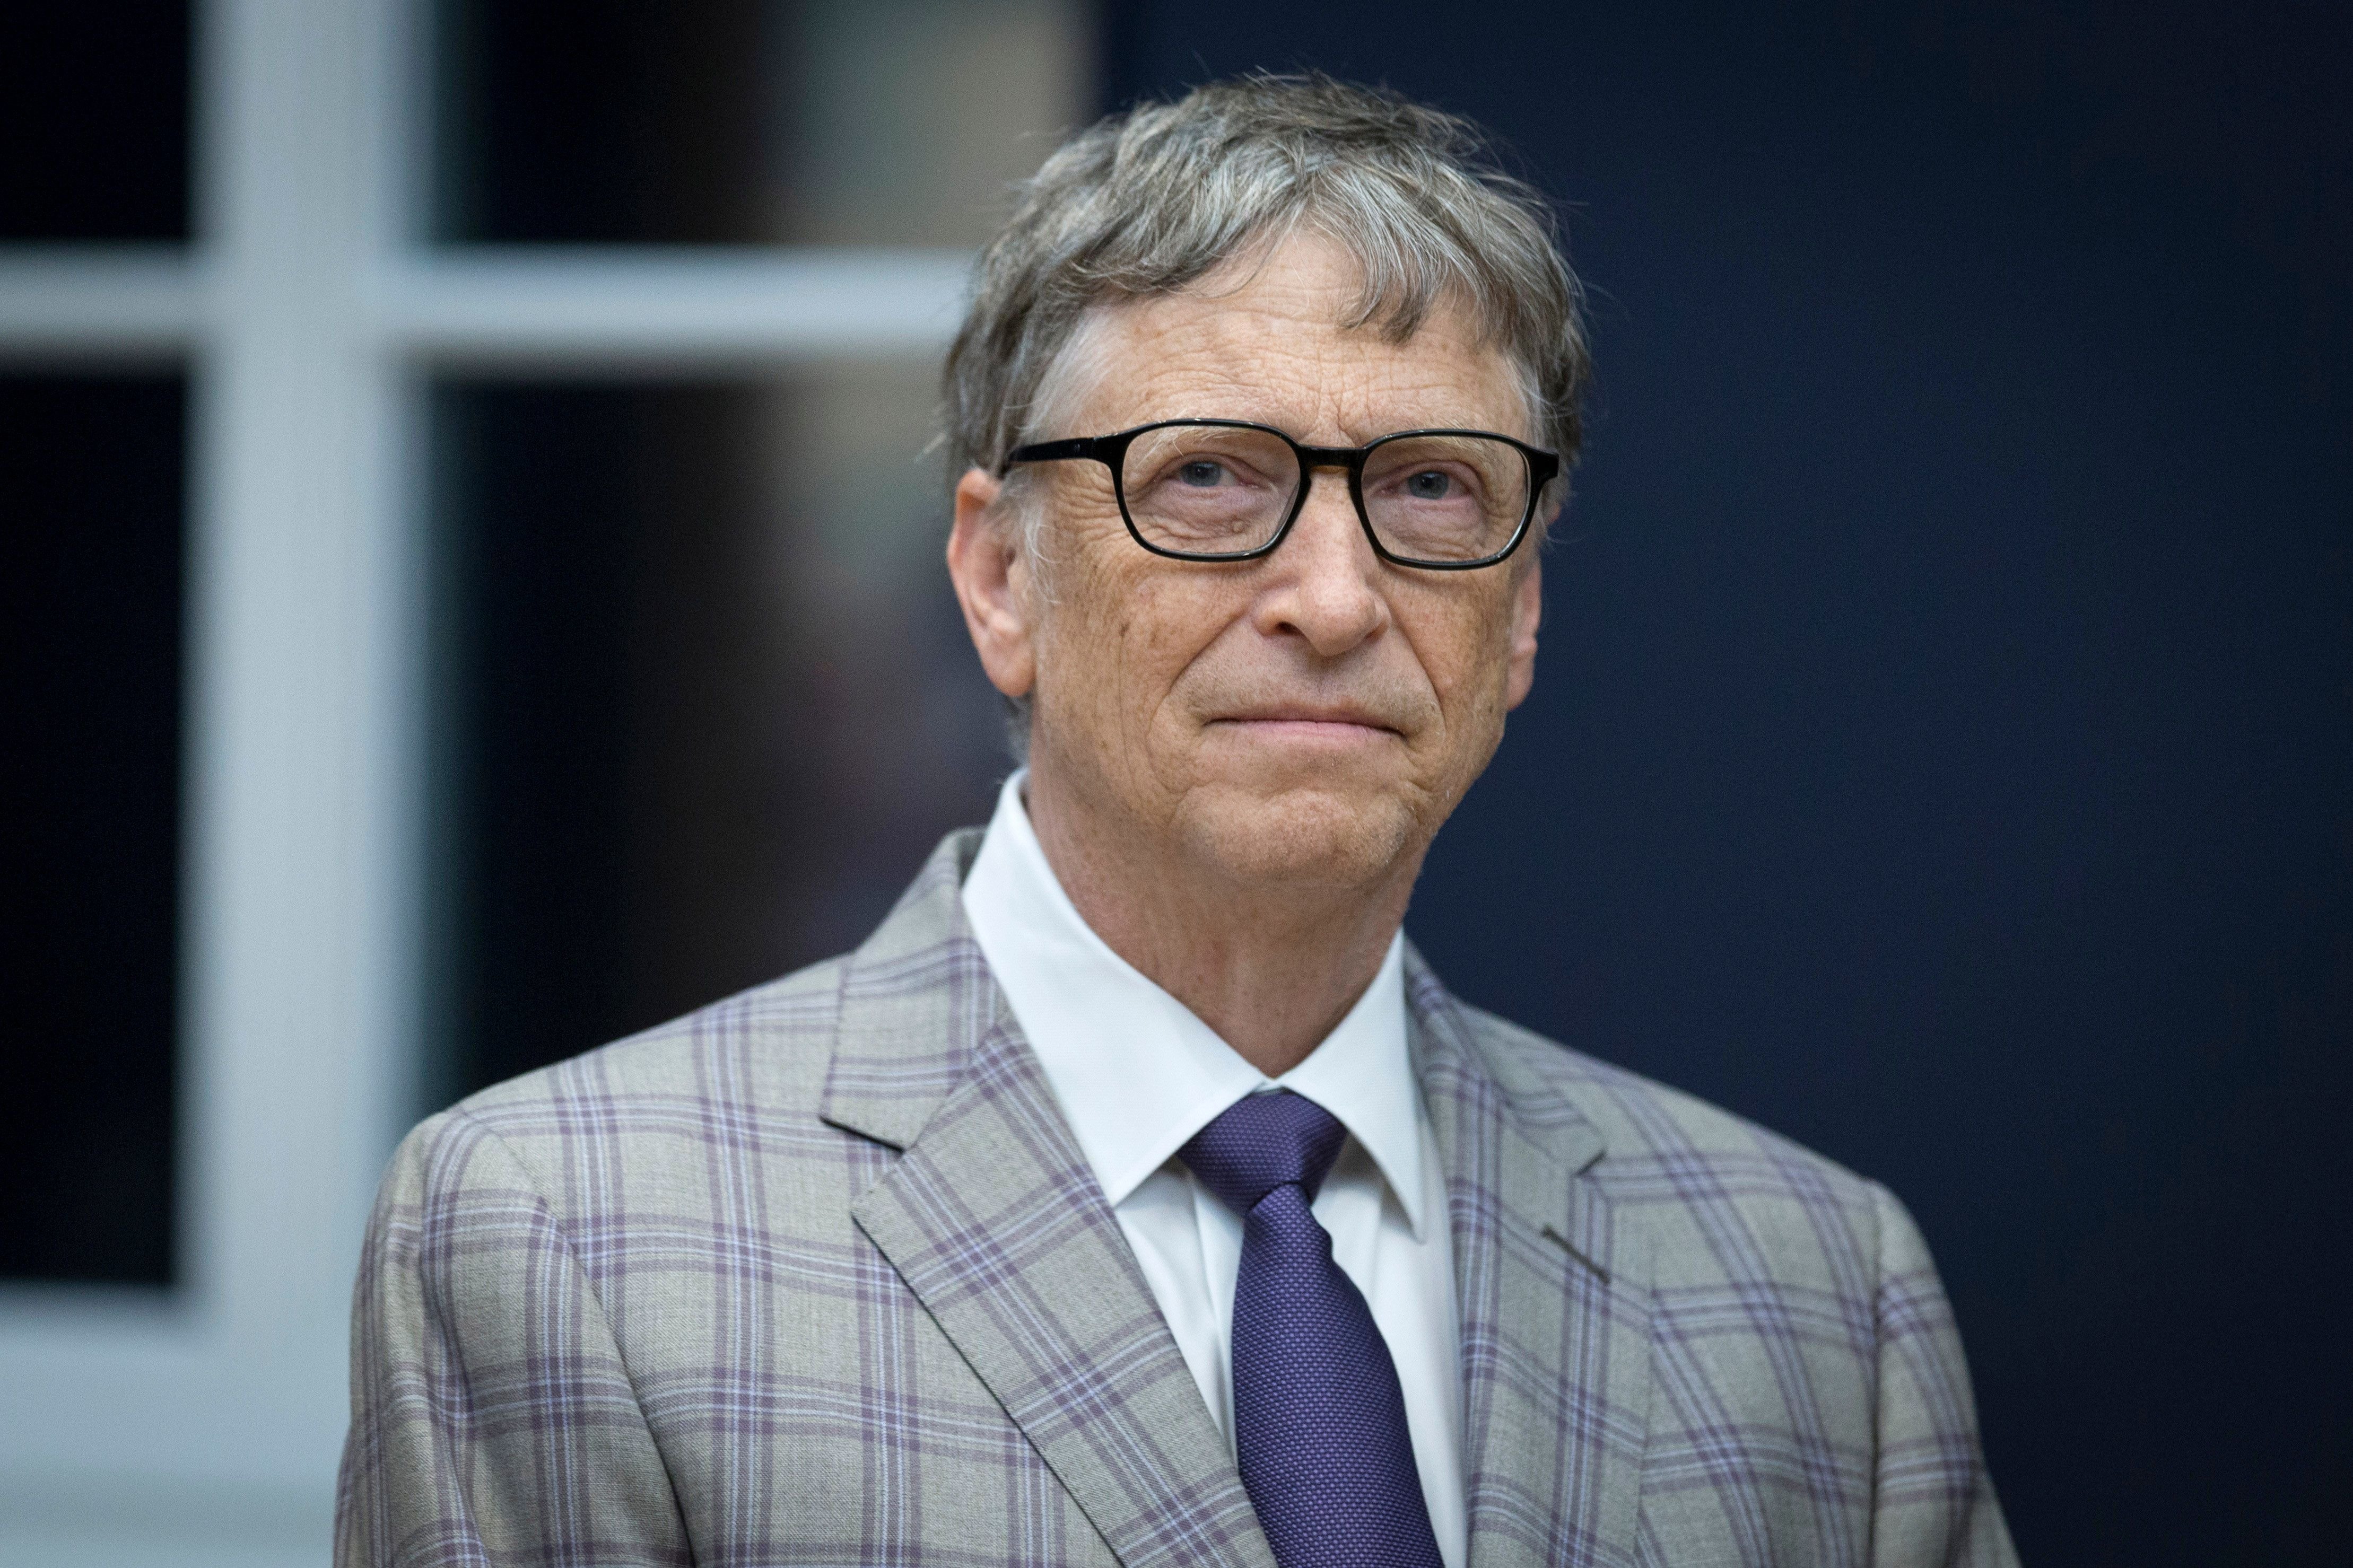 Bill Gates at the opening of the Barberini Museum on January 20, 2017 in Potsdam | Photo: Getty Images